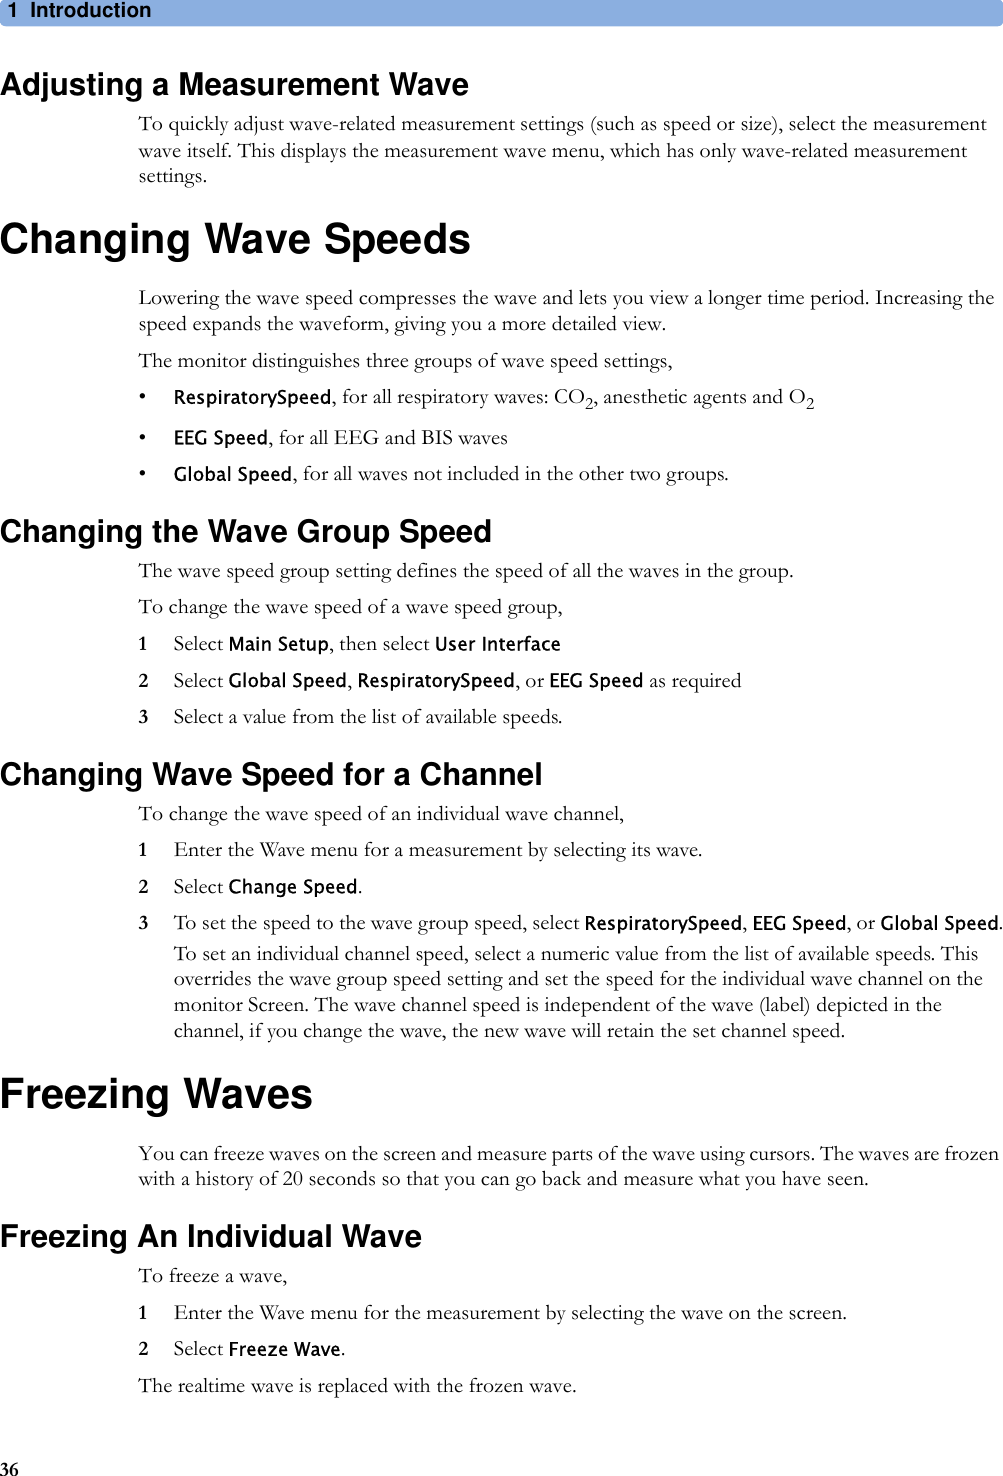 1 Introduction36Adjusting a Measurement WaveTo quickly adjust wave-related measurement settings (such as speed or size), select the measurement wave itself. This displays the measurement wave menu, which has only wave-related measurement settings.Changing Wave SpeedsLowering the wave speed compresses the wave and lets you view a longer time period. Increasing the speed expands the waveform, giving you a more detailed view.The monitor distinguishes three groups of wave speed settings,•RespiratorySpeed, for all respiratory waves: CO2, anesthetic agents and O2•EEG Speed, for all EEG and BIS waves•Global Speed, for all waves not included in the other two groups.Changing the Wave Group SpeedThe wave speed group setting defines the speed of all the waves in the group.To change the wave speed of a wave speed group,1Select Main Setup, then select User Interface2Select Global Speed, RespiratorySpeed, or EEG Speed as required3Select a value from the list of available speeds.Changing Wave Speed for a ChannelTo change the wave speed of an individual wave channel,1Enter the Wave menu for a measurement by selecting its wave.2Select Change Speed.3To set the speed to the wave group speed, select RespiratorySpeed, EEG Speed, or Global Speed.To set an individual channel speed, select a numeric value from the list of available speeds. This overrides the wave group speed setting and set the speed for the individual wave channel on the monitor Screen. The wave channel speed is independent of the wave (label) depicted in the channel, if you change the wave, the new wave will retain the set channel speed.Freezing WavesYou can freeze waves on the screen and measure parts of the wave using cursors. The waves are frozen with a history of 20 seconds so that you can go back and measure what you have seen.Freezing An Individual WaveTo freeze a wave,1Enter the Wave menu for the measurement by selecting the wave on the screen.2Select Freeze Wave.The realtime wave is replaced with the frozen wave.